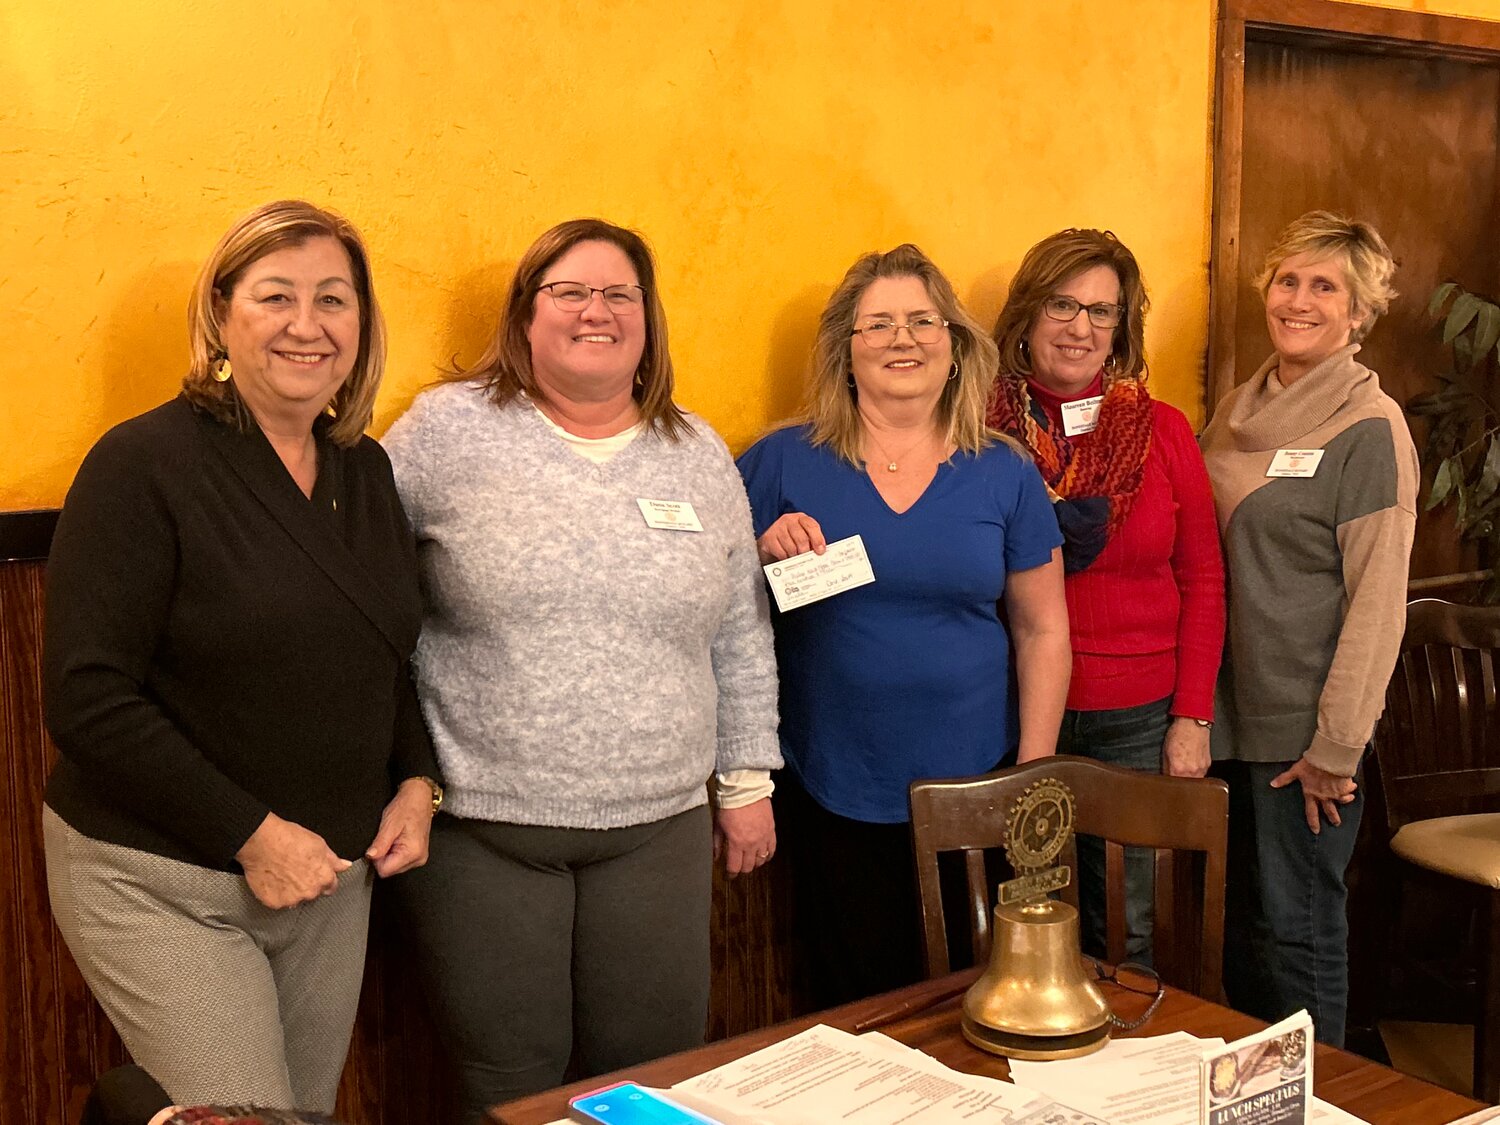 Last year's Pet Paw-rade raised funds in part to help Billy's New Hope Barn. Pictured are Georgia Solotoff, left and Dana Scott of Honesdale Rotary; Marcie Bunting, of Billy’s New Hope Barn; Rotarian Maureen Beilman; and Honesdale Rotary co-president Bonny Cousins.